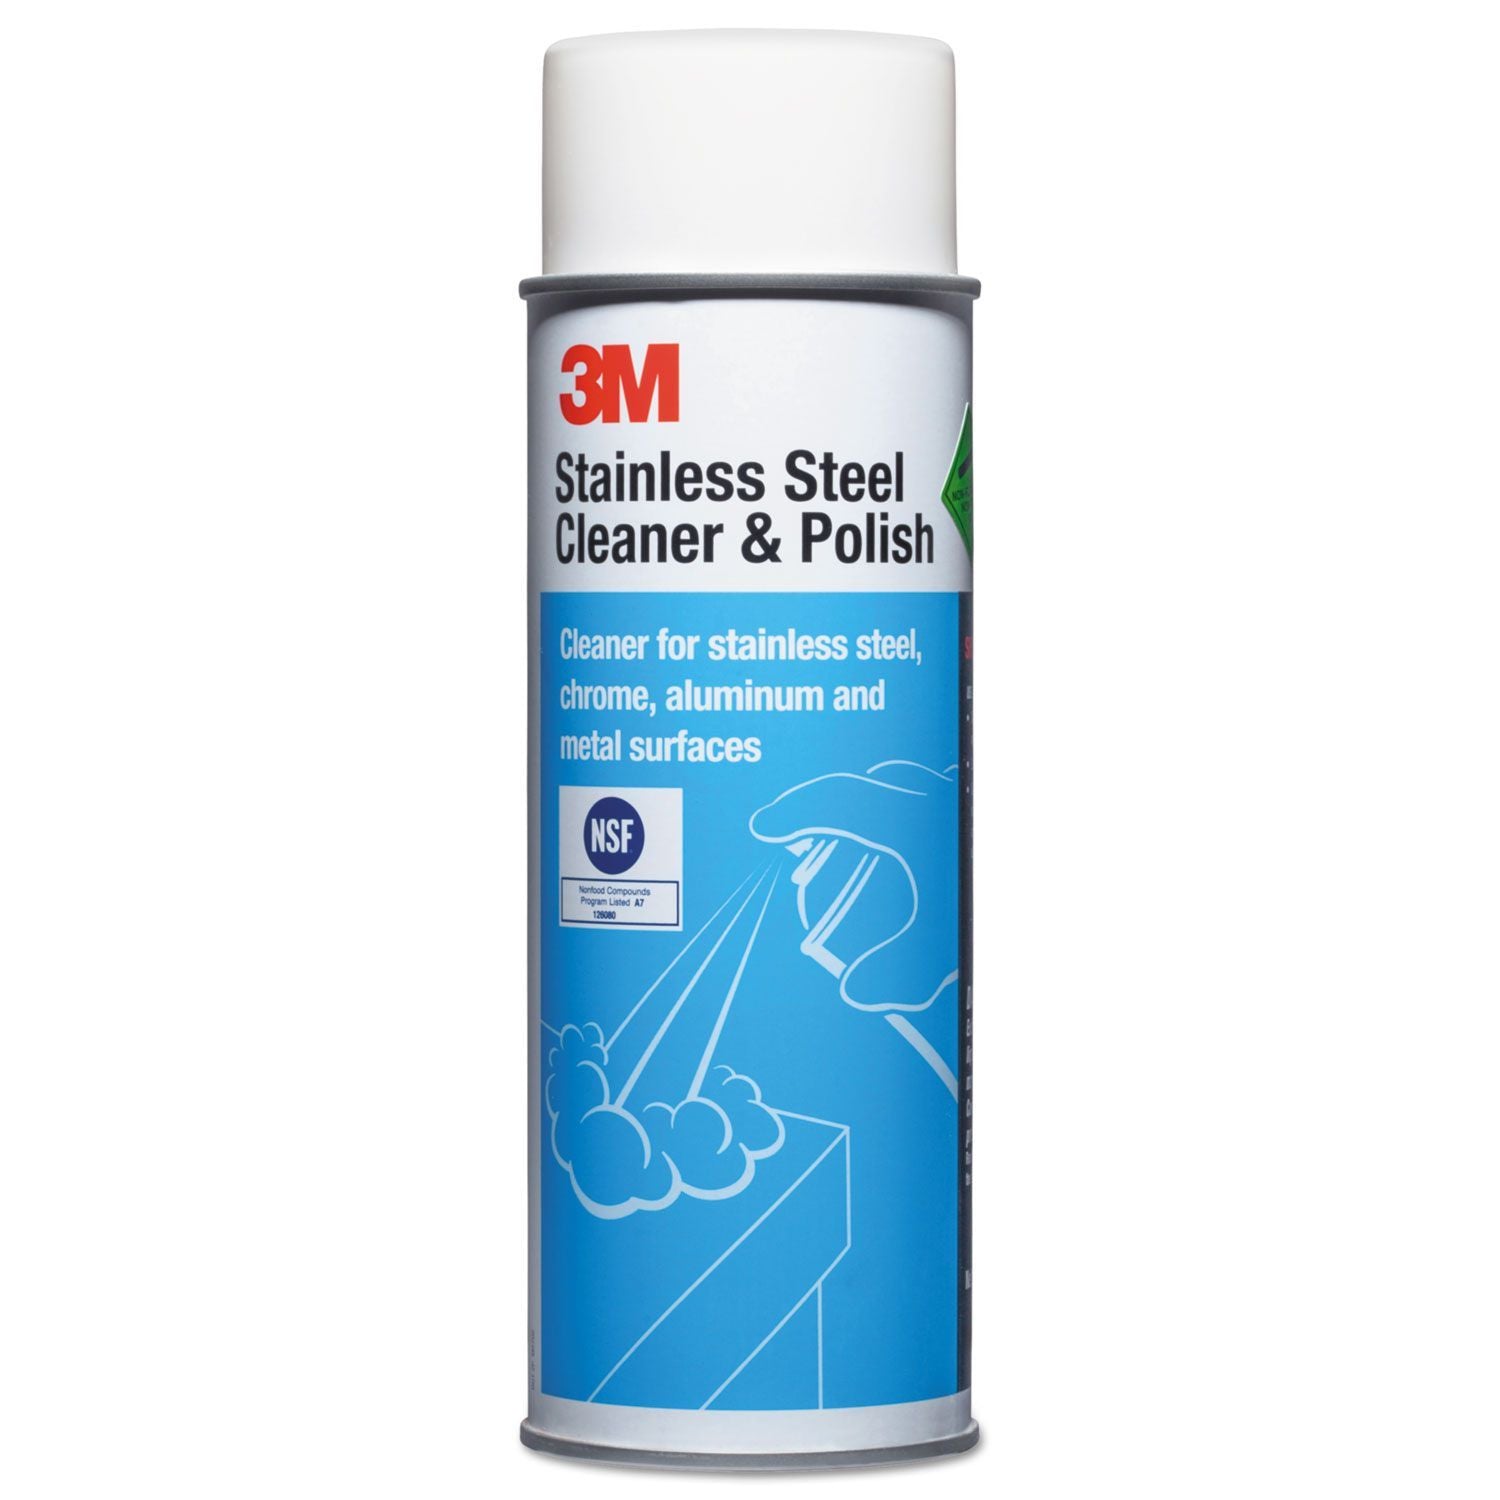 3M Scotch Stainless Steel Cleaner & Polish